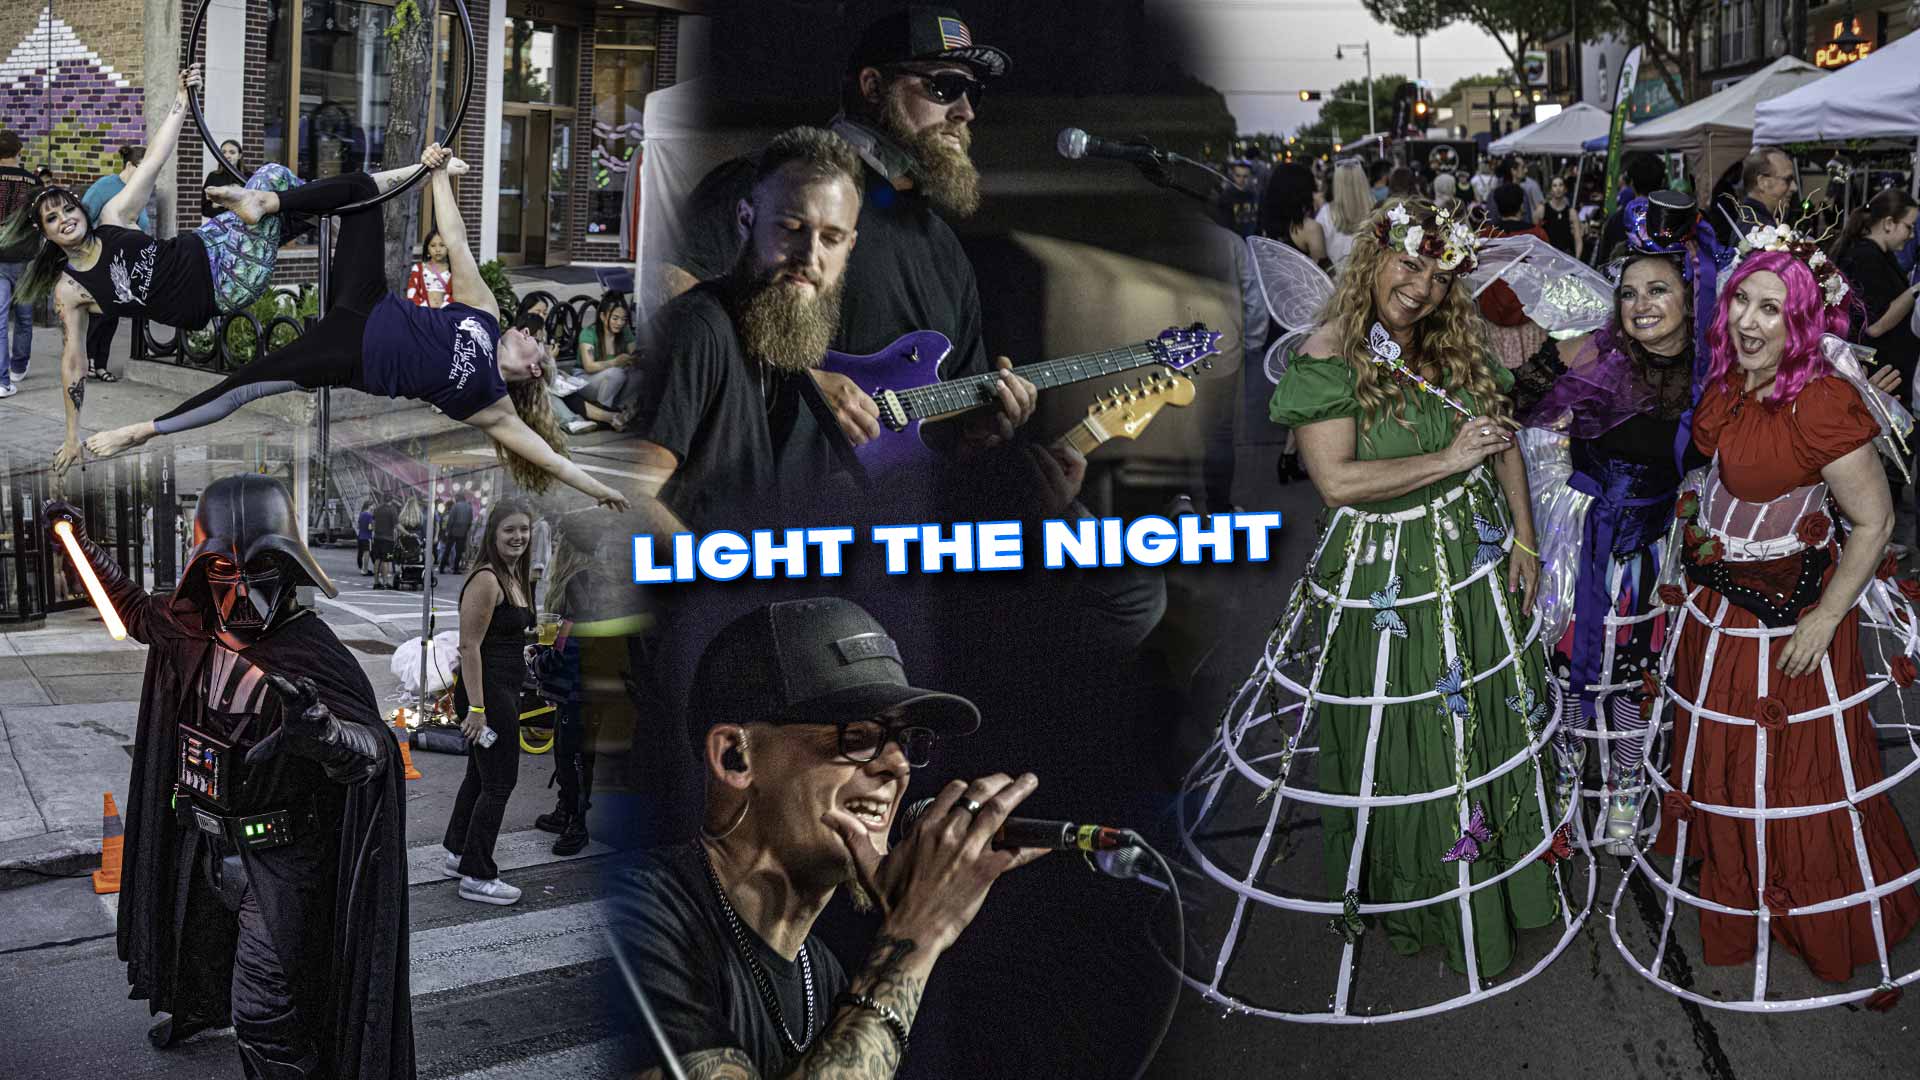 Light the Night Market with Avenue 55 Band